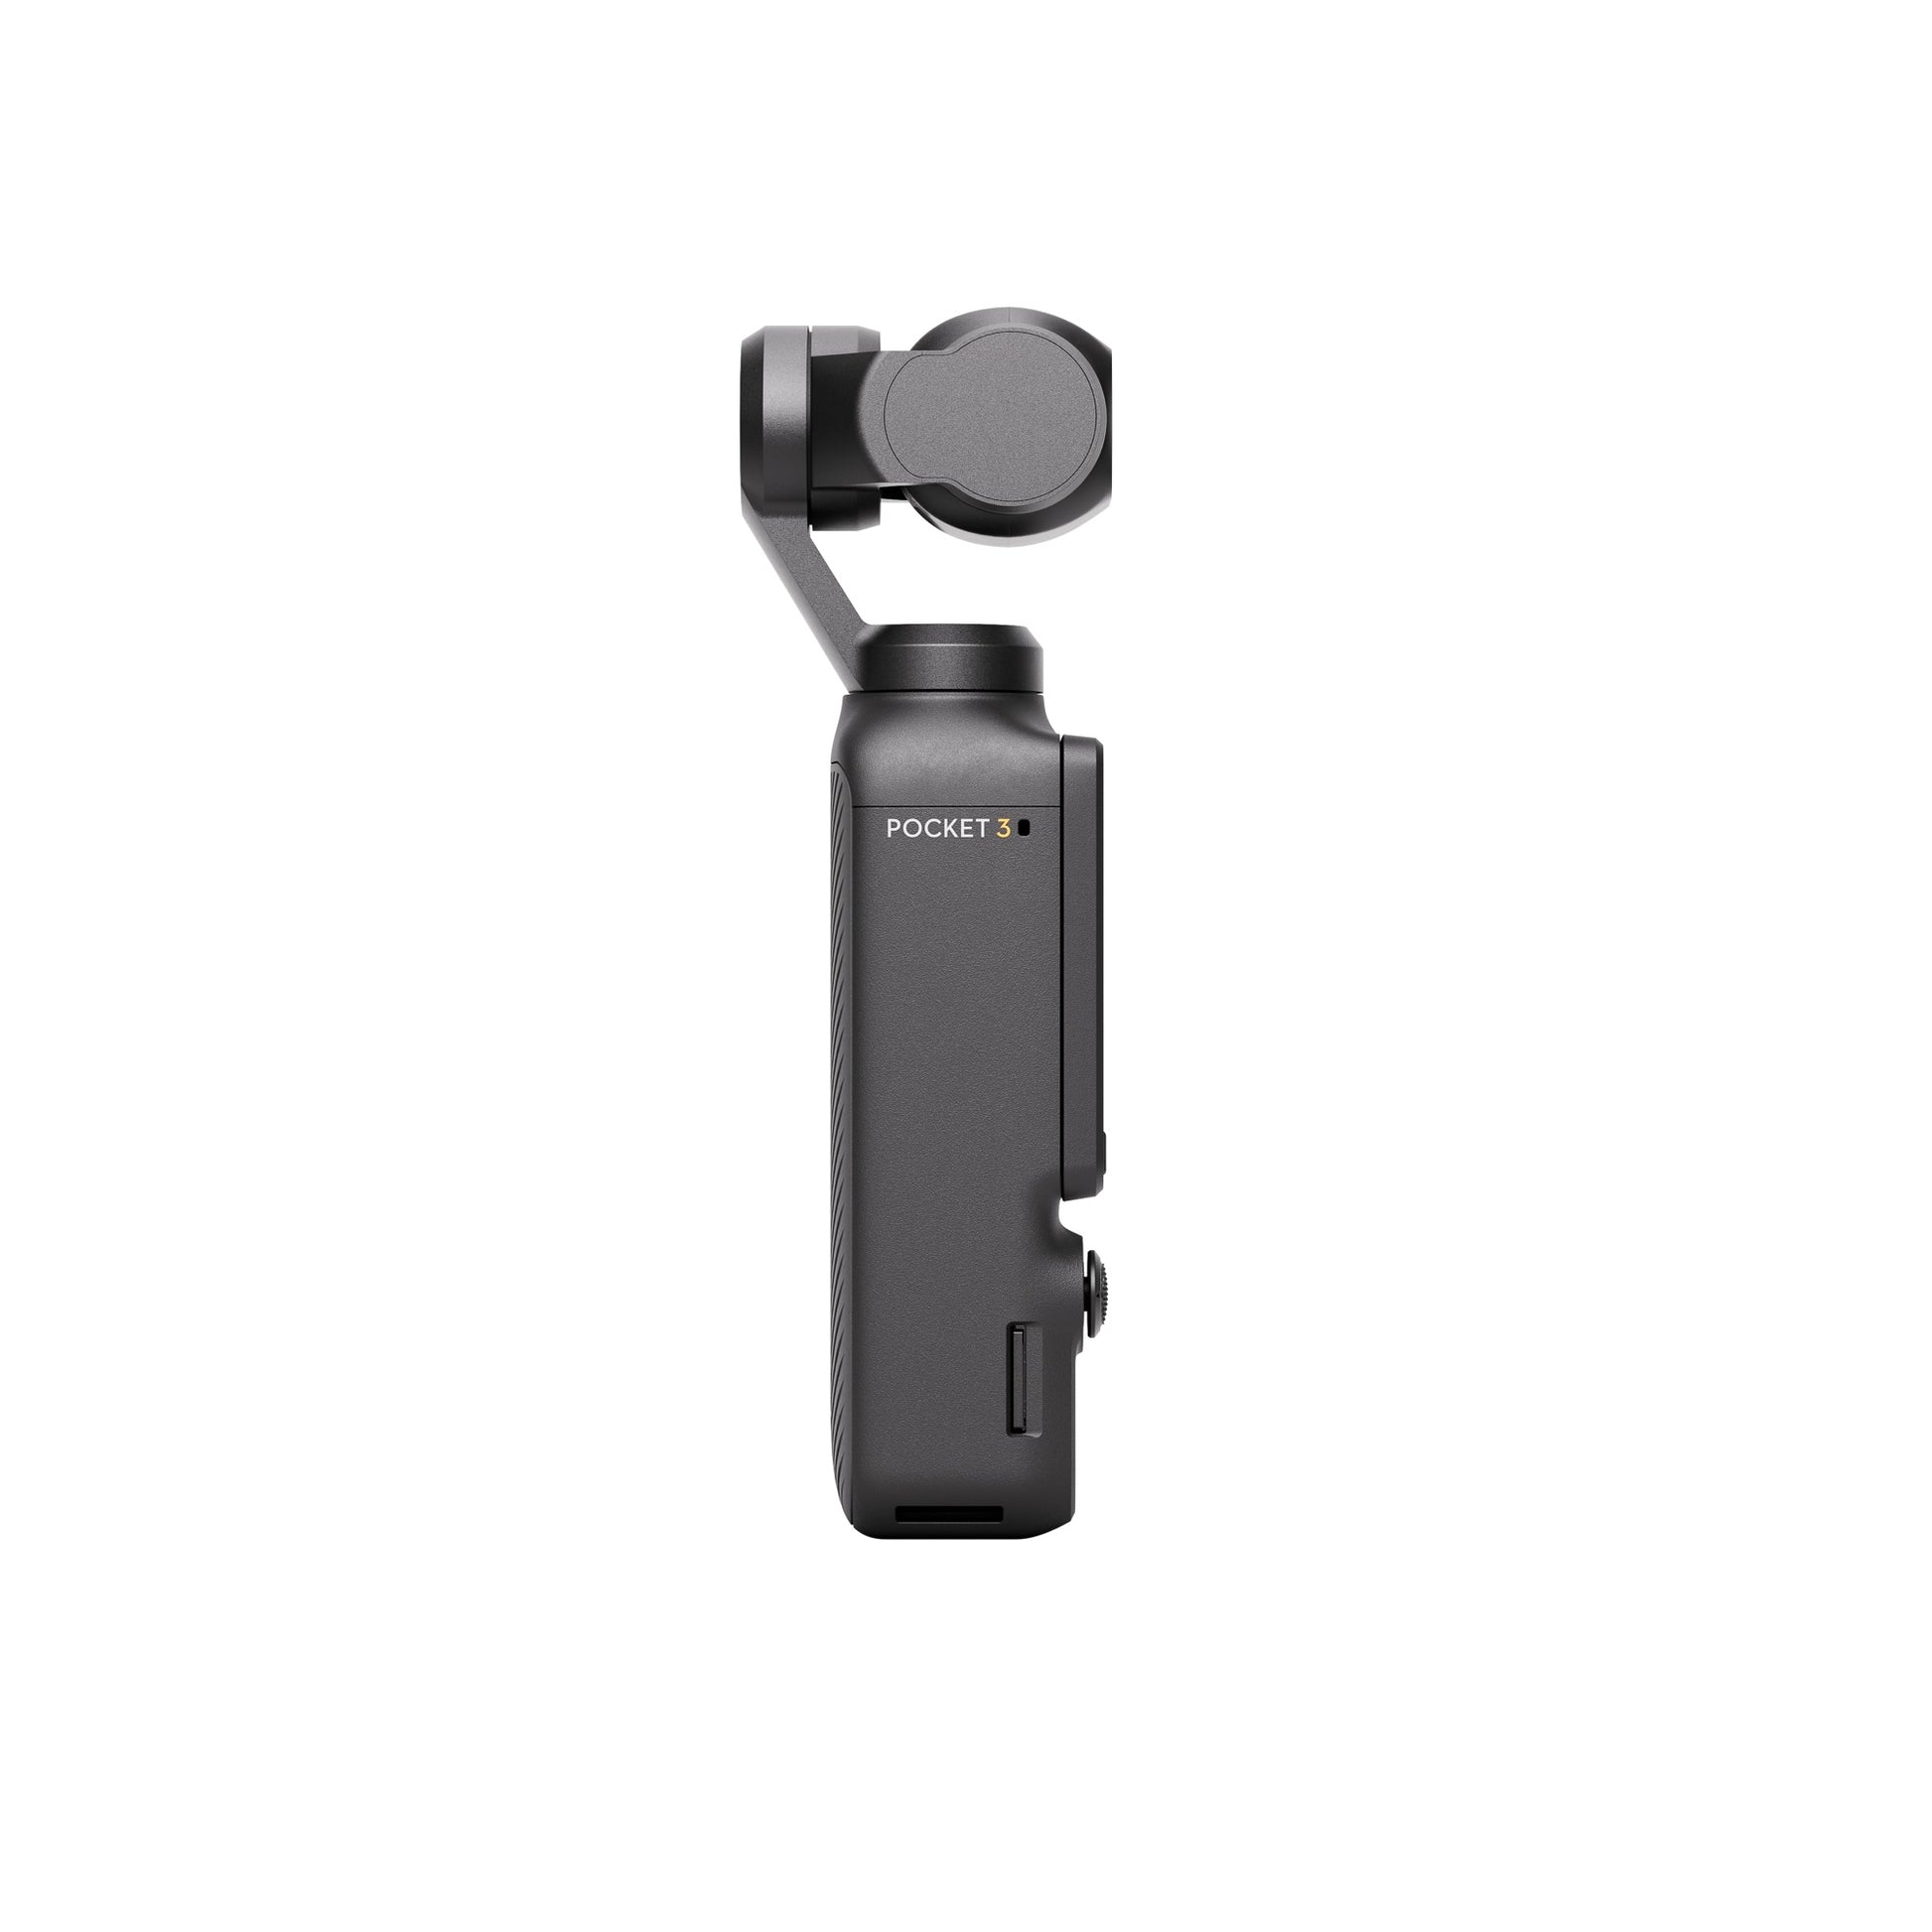 Buy Osmo Pocket 3 Expansion Adapter - DJI Store